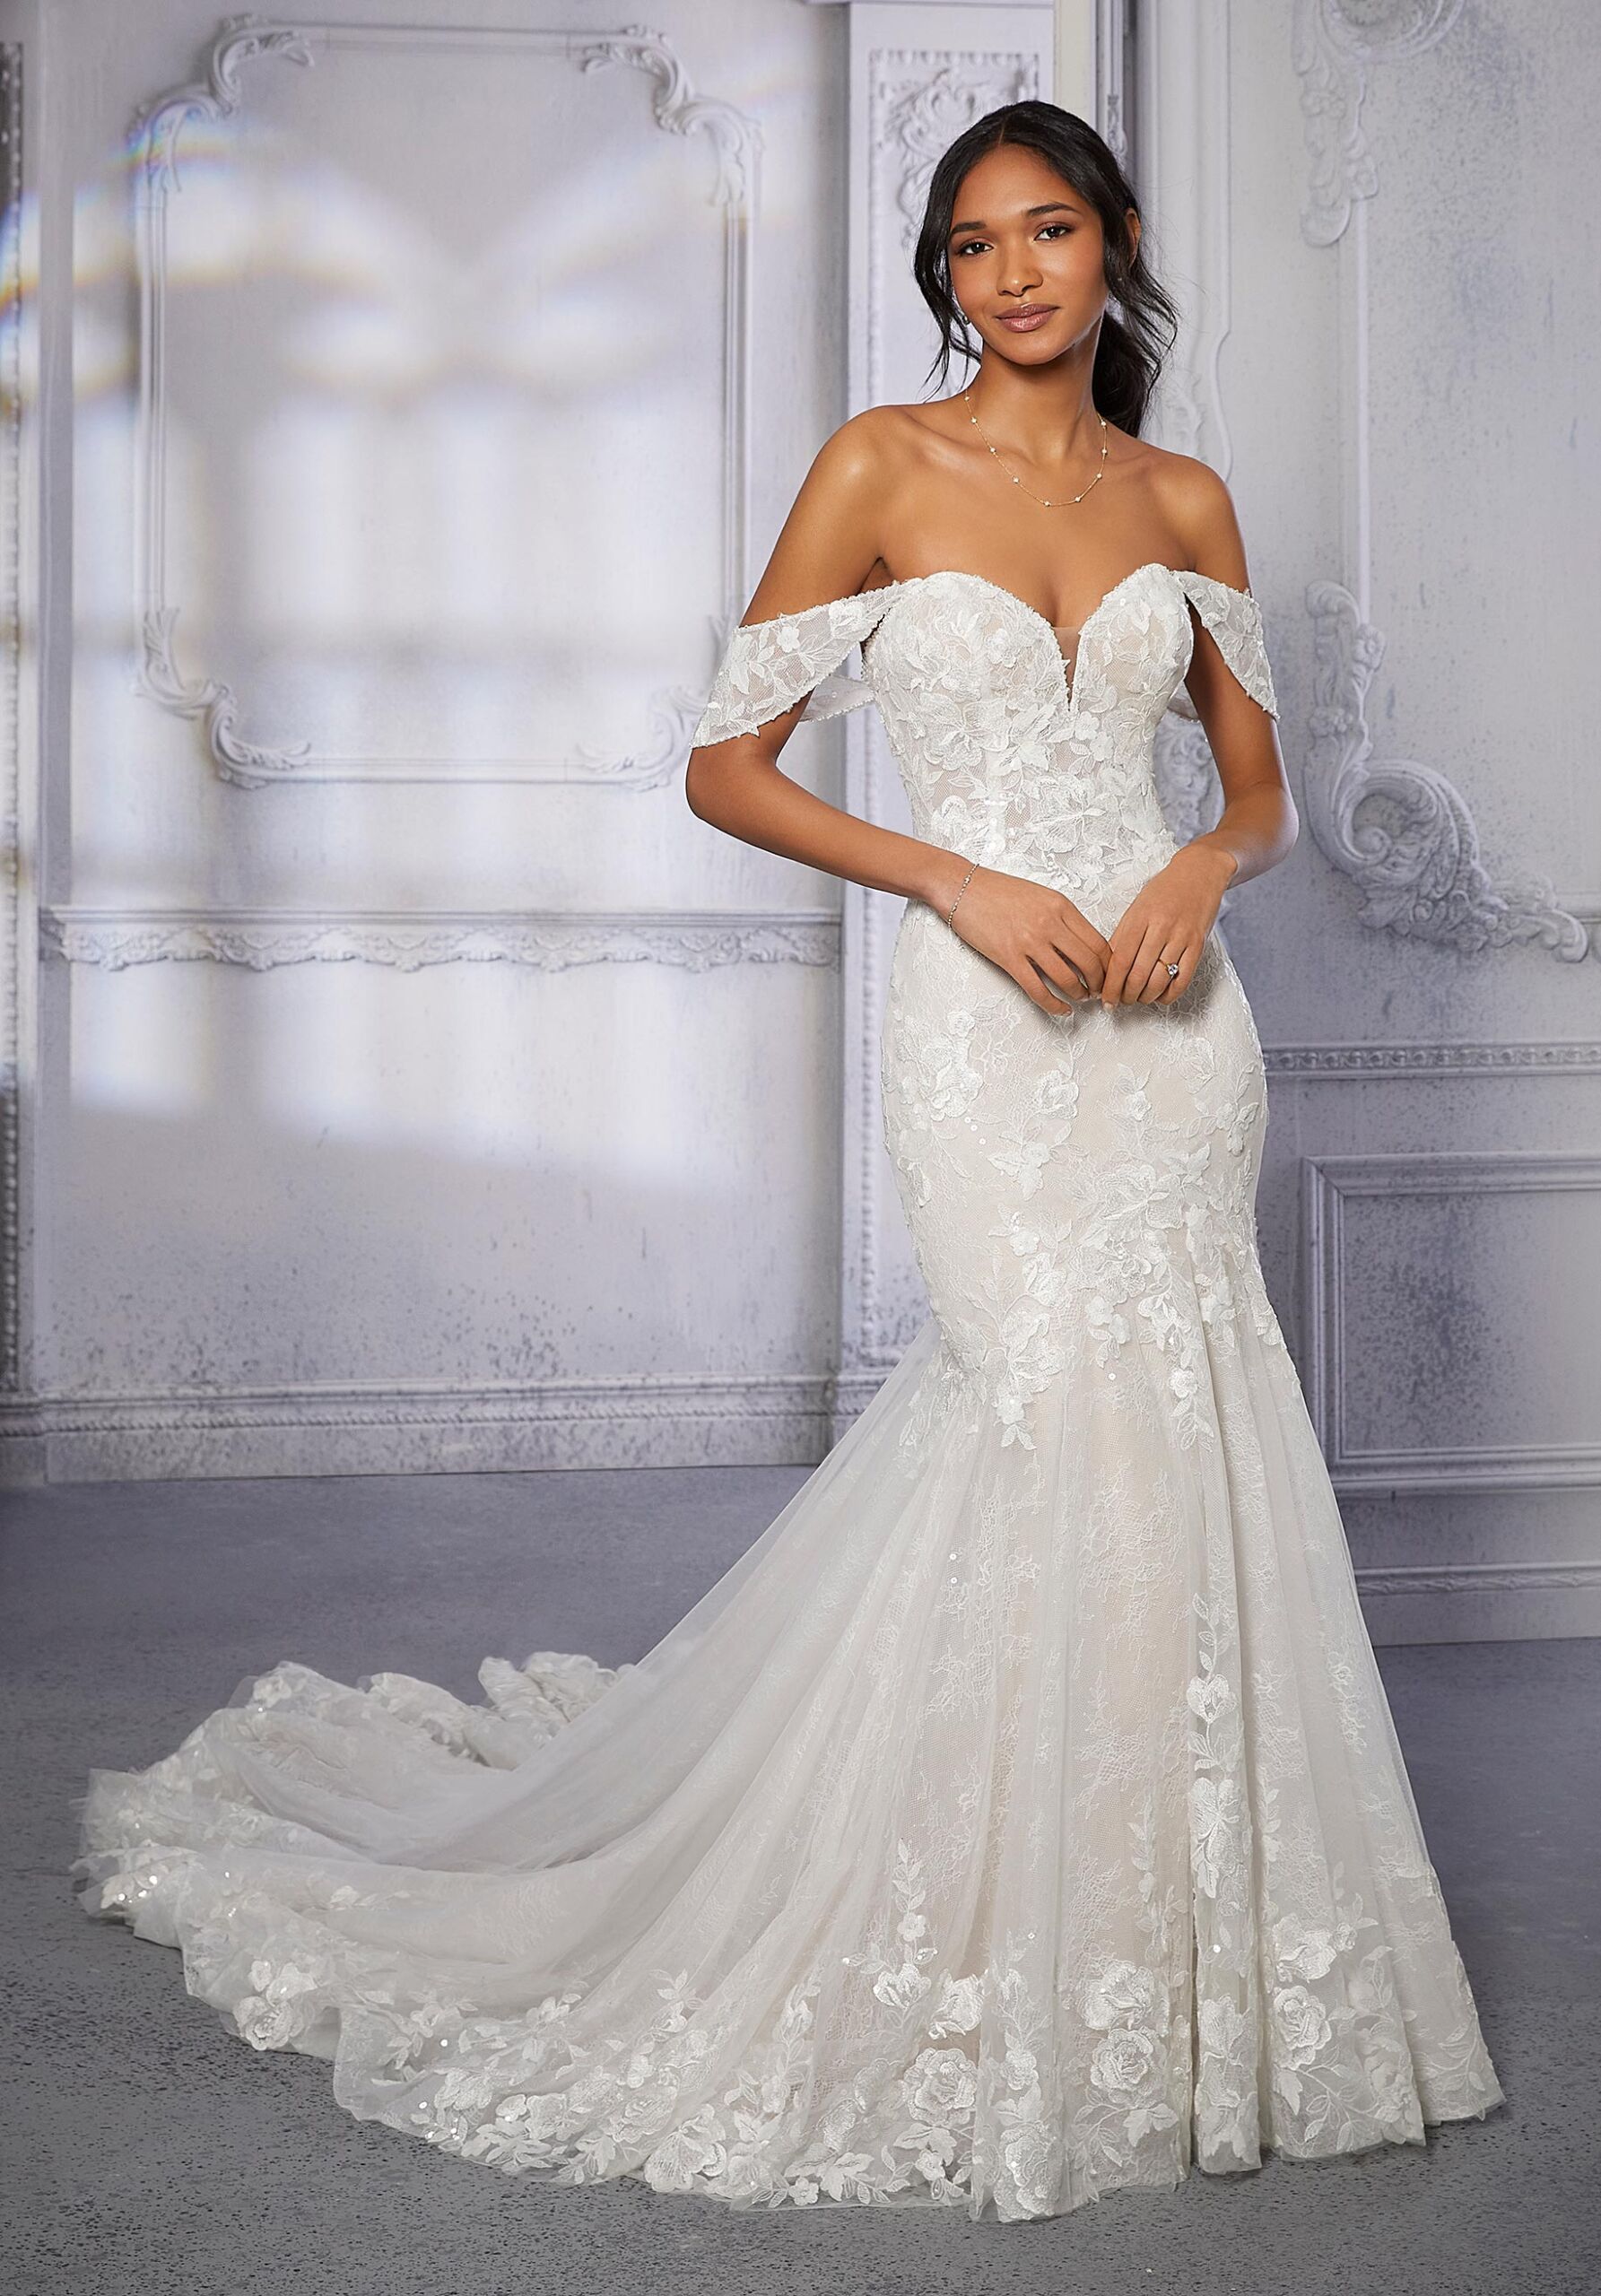 QIUXIANG Fashion wedding dress Sexy Mermaid Wedding Dresses Lace Appliques  Strapless Style MermaidTrumpet bridal Dress Wedding gowns With Detachable  Sleeves Color  Custom made US Size  2  Amazoncouk Fashion